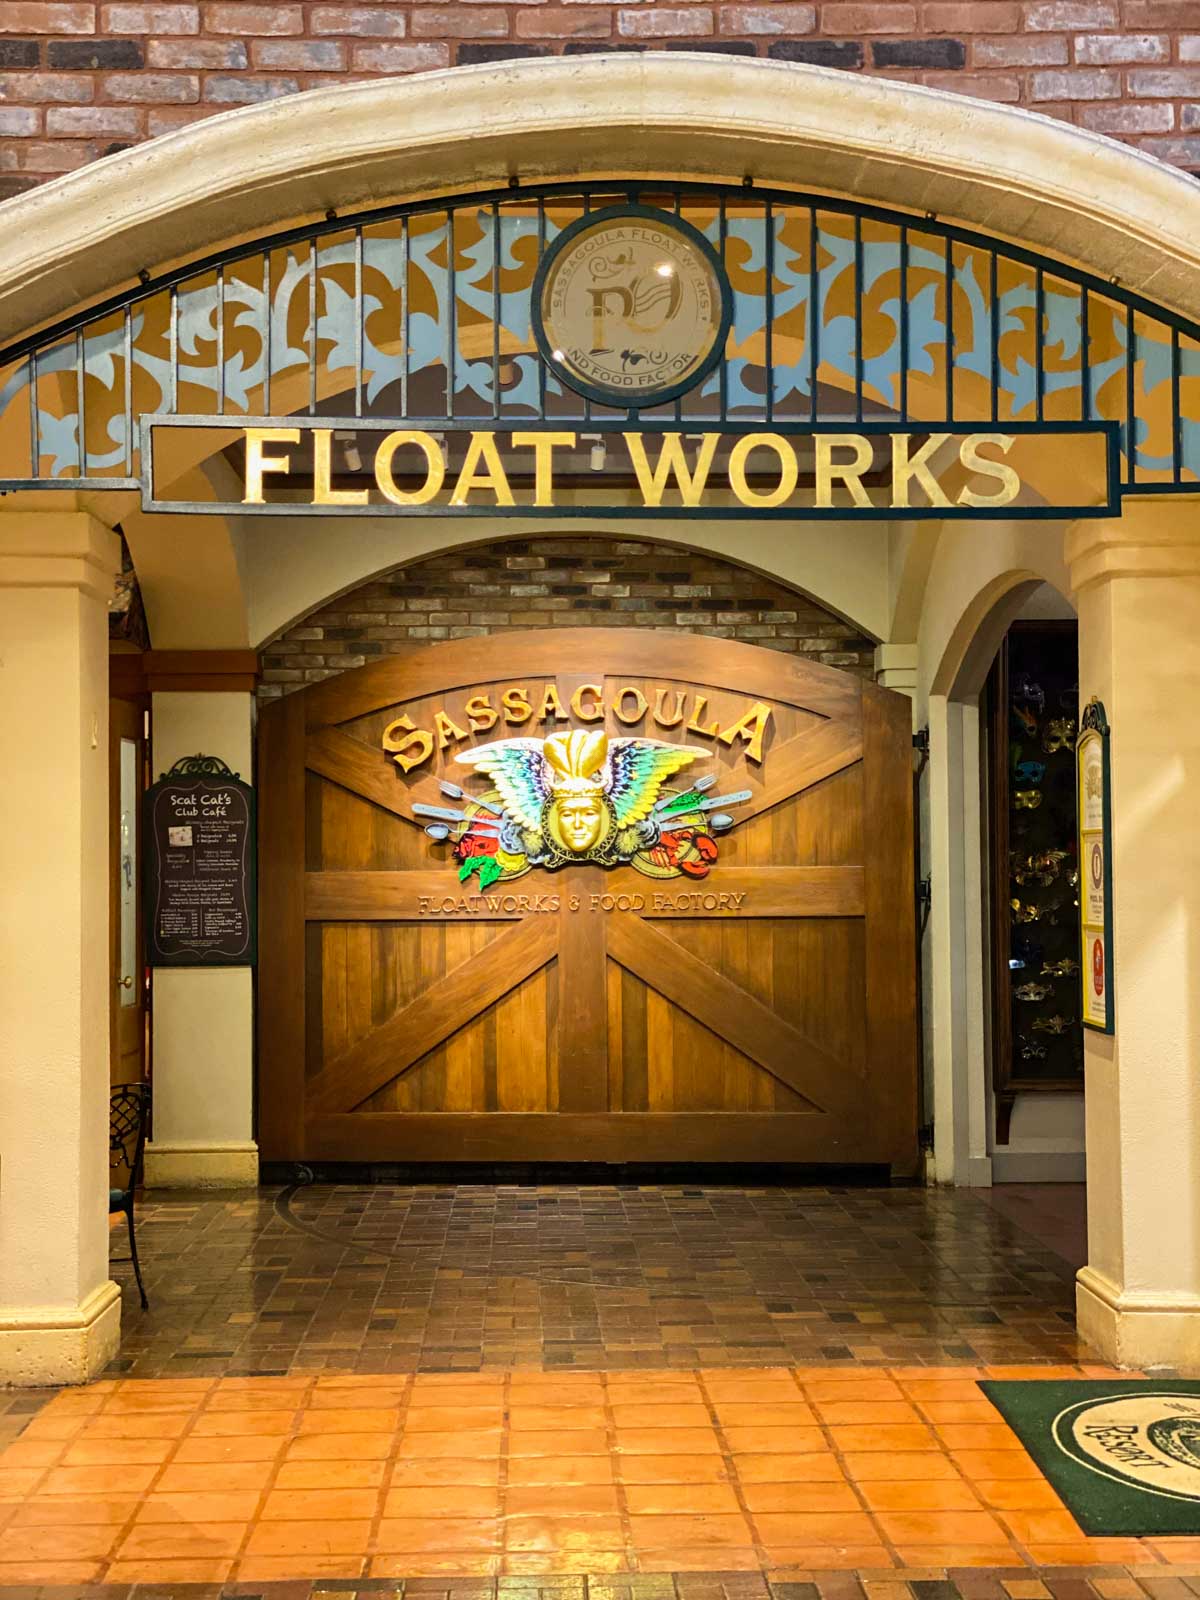 The welcome sign to the Sassagoula Float Works at Disney's Port Orleans.